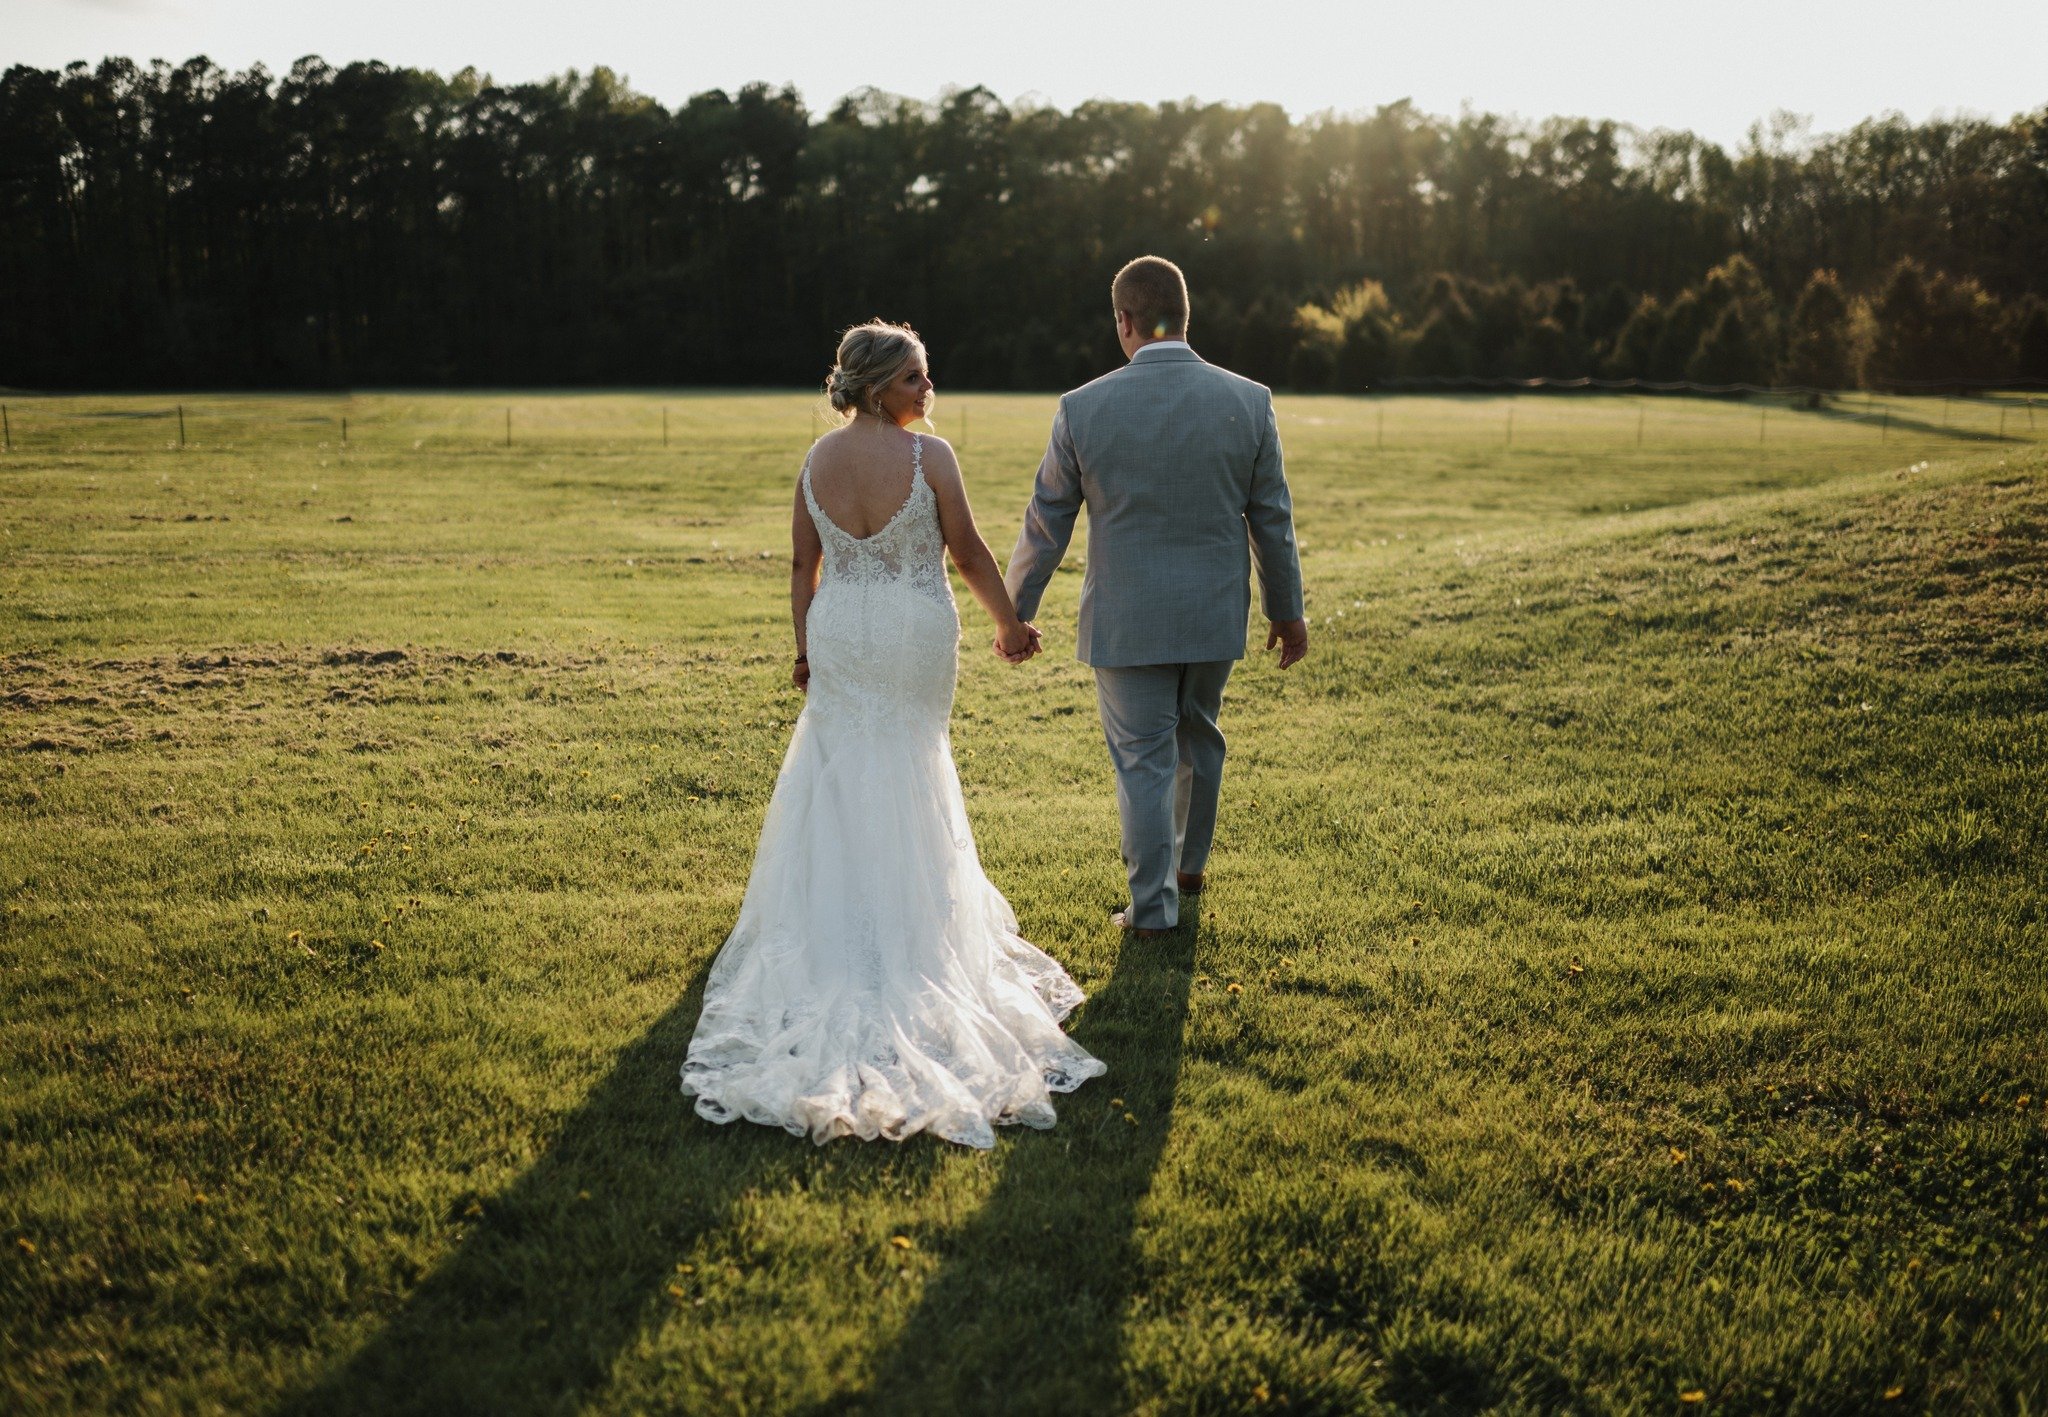 Congratulations to Emily &amp; James! 

We are honored every time a couple decides to celebrate their union with us at Loblolly Acres. It's a reminder of the beauty of love and the power of commitment, and we are grateful to be a part of their journe